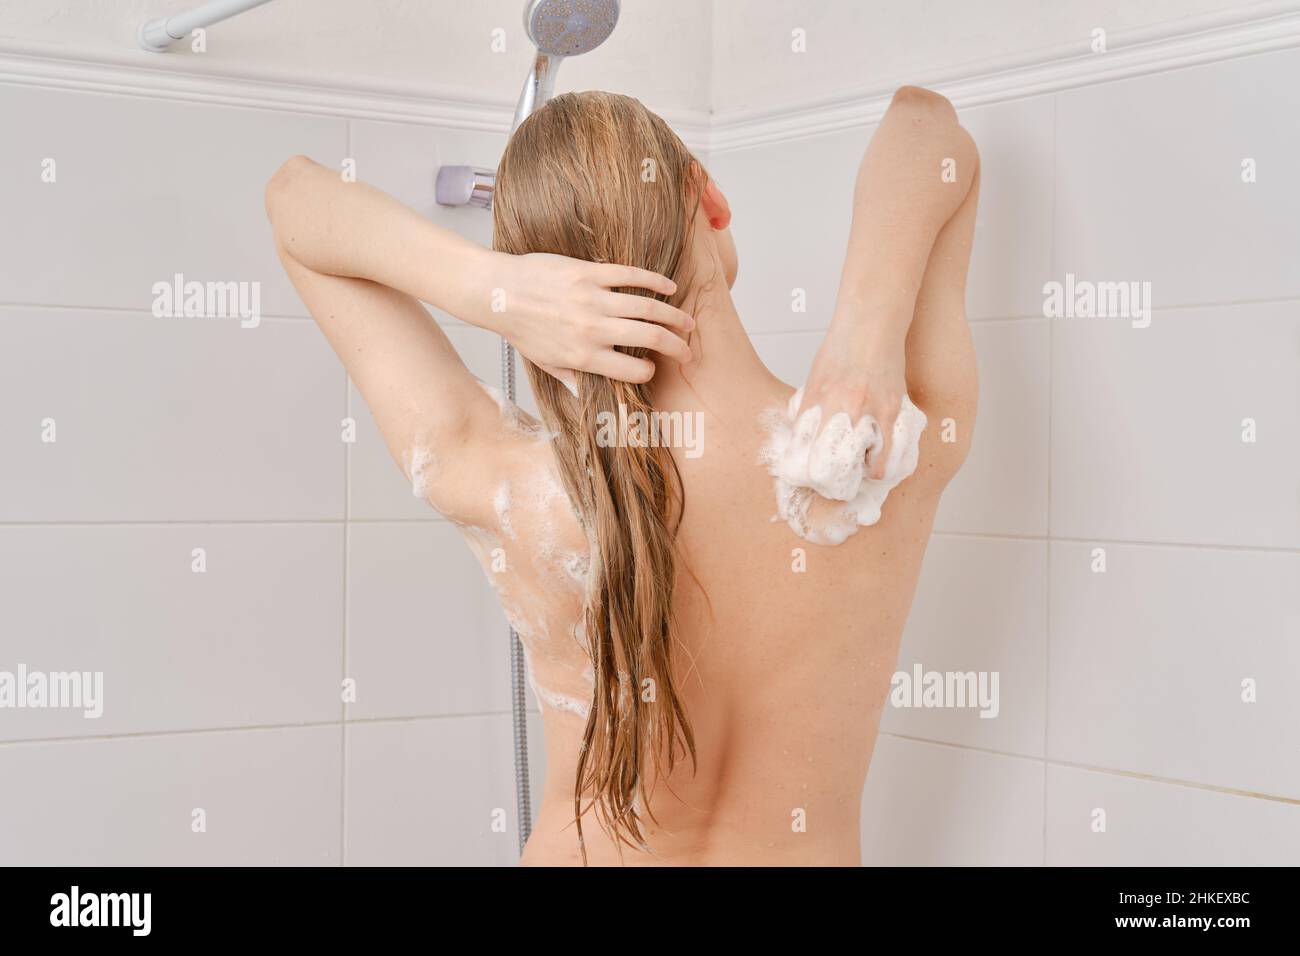 Young woman soaps her body in bathroom while turning back to camera Stock Photo